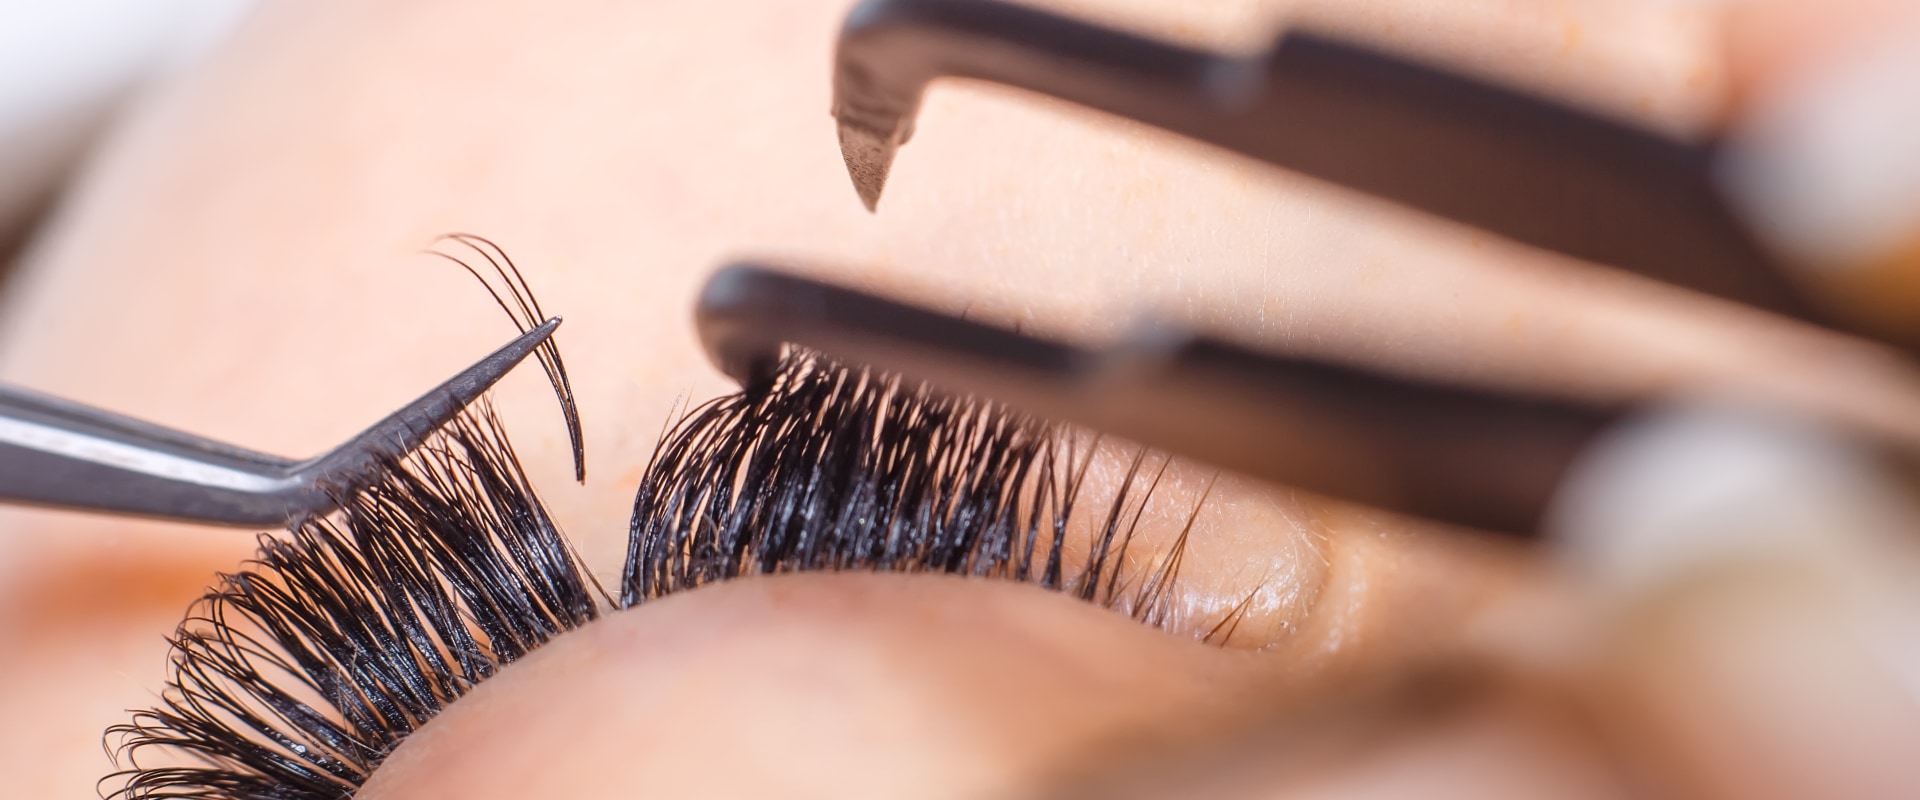 Which lash extensions are the lightest?